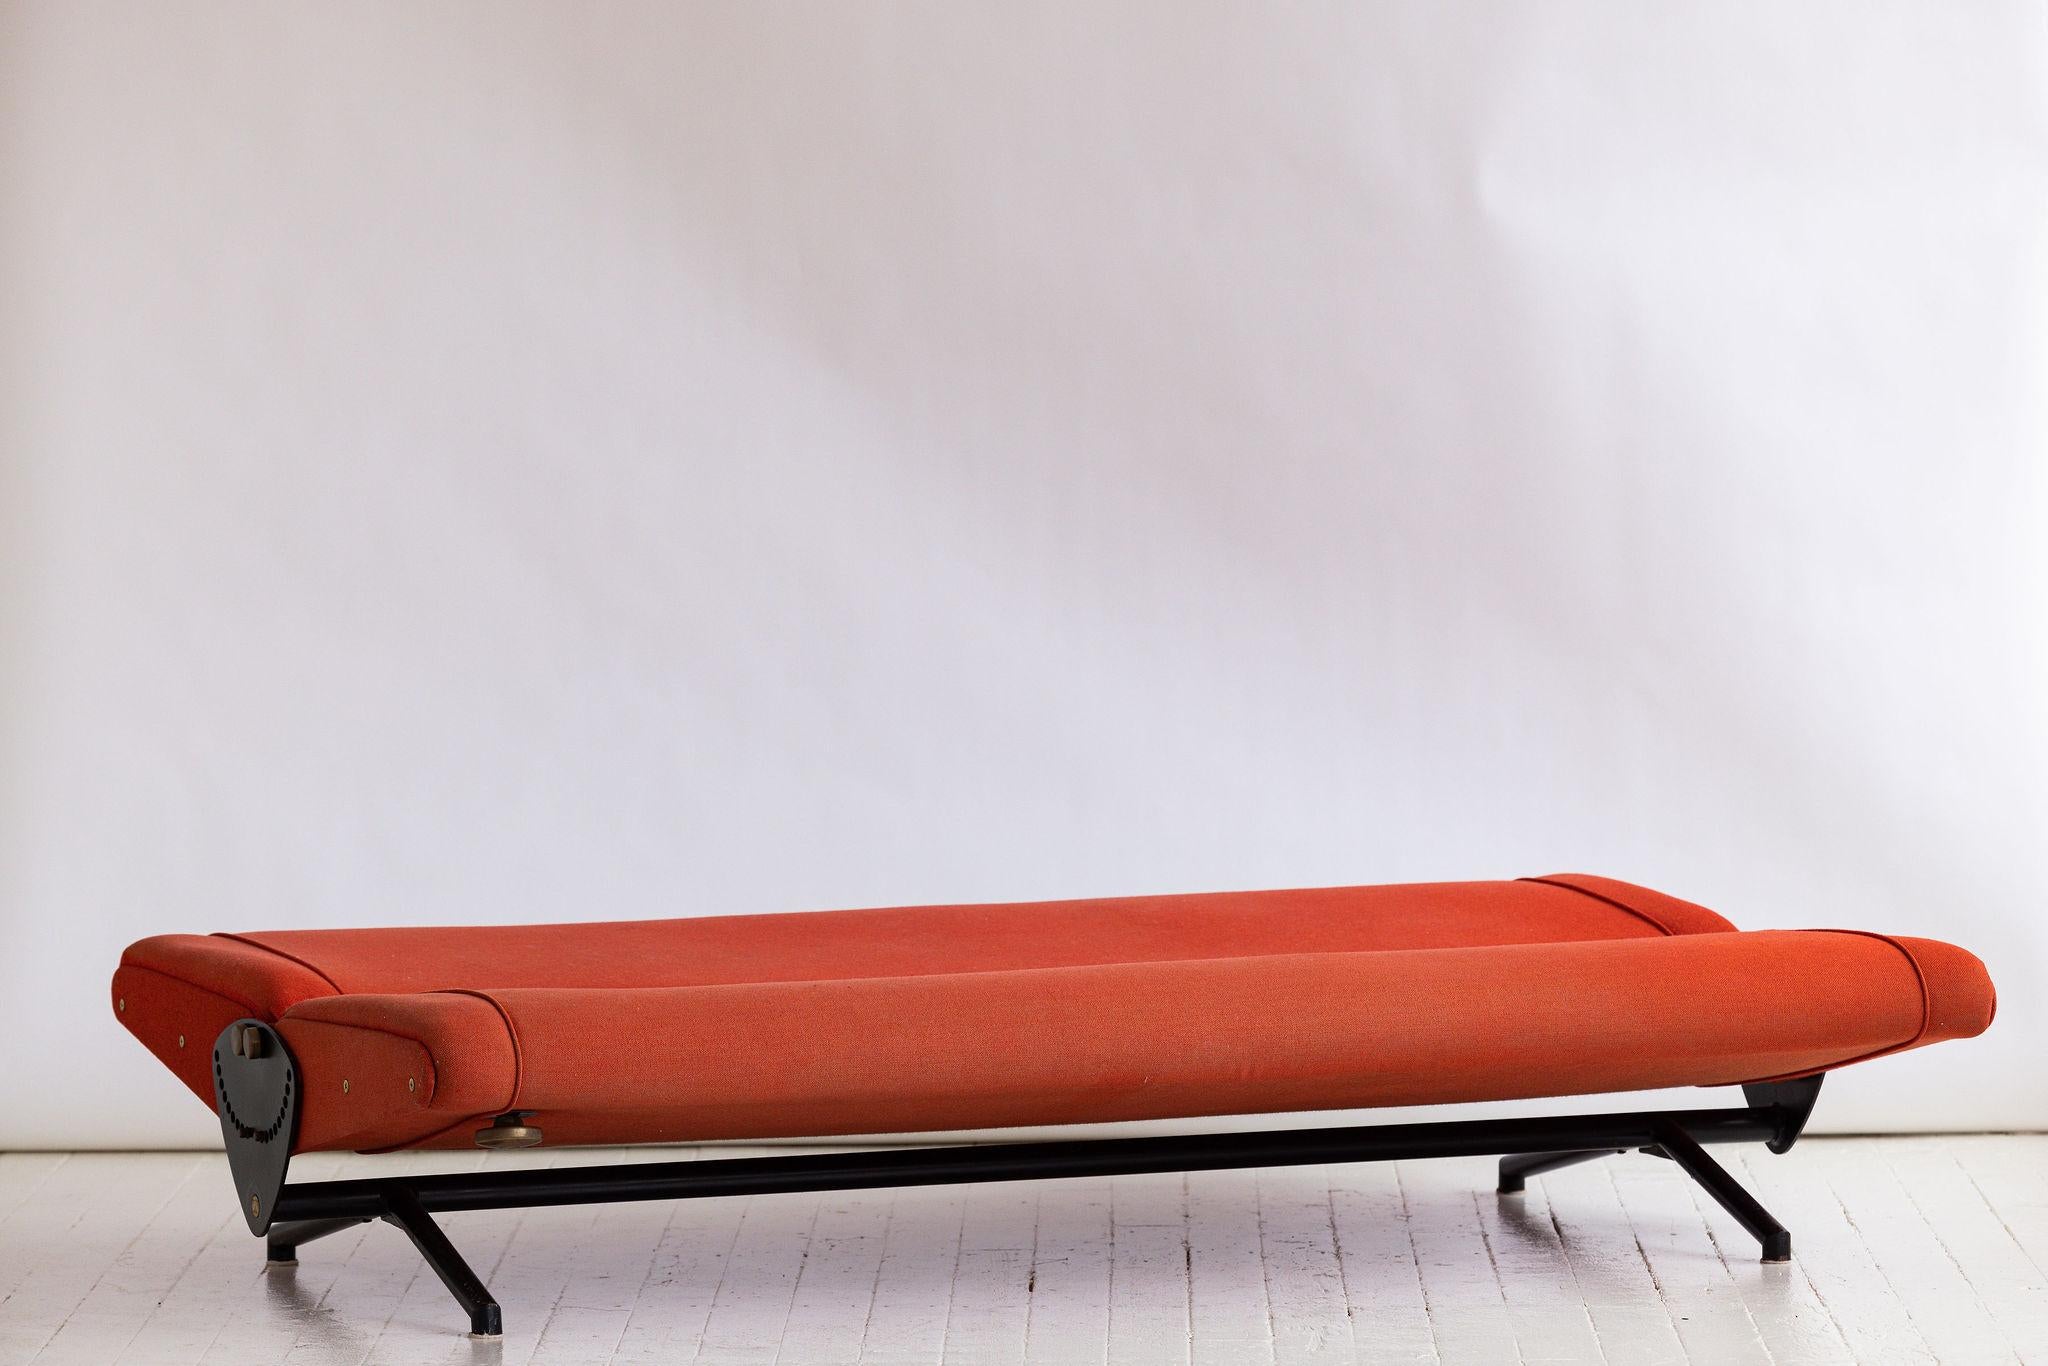 Extrordinary elegence in form,  outstanding in a technical sense. A sofa that transforms to a daybed. Designed by Osvaldo Borsani in 1954. With a single twist, the back and seating are positioned upwards (or down) making it practical for any